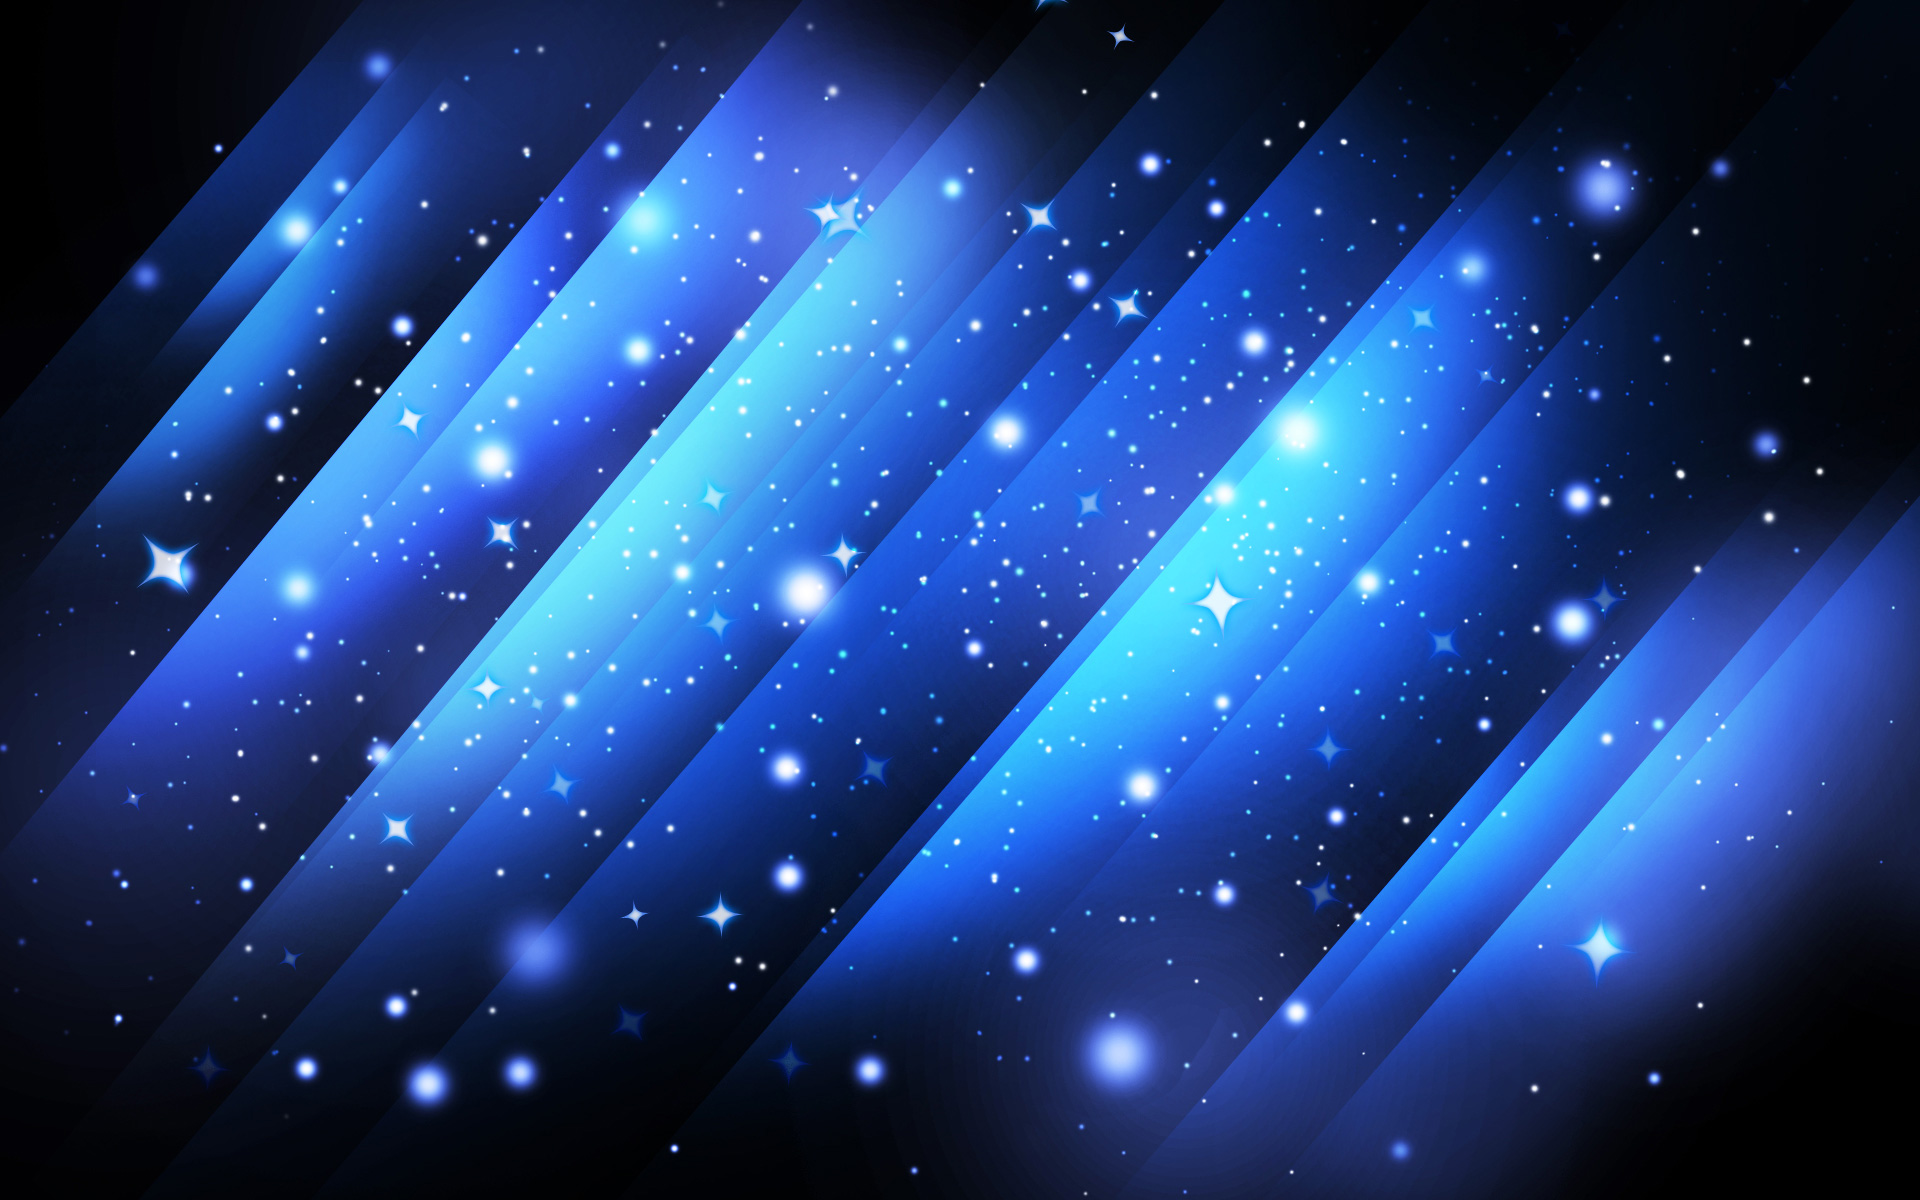 Background For Photoshop Wallpaper - Nice Background For Photoshop -  1920x1200 Wallpaper 